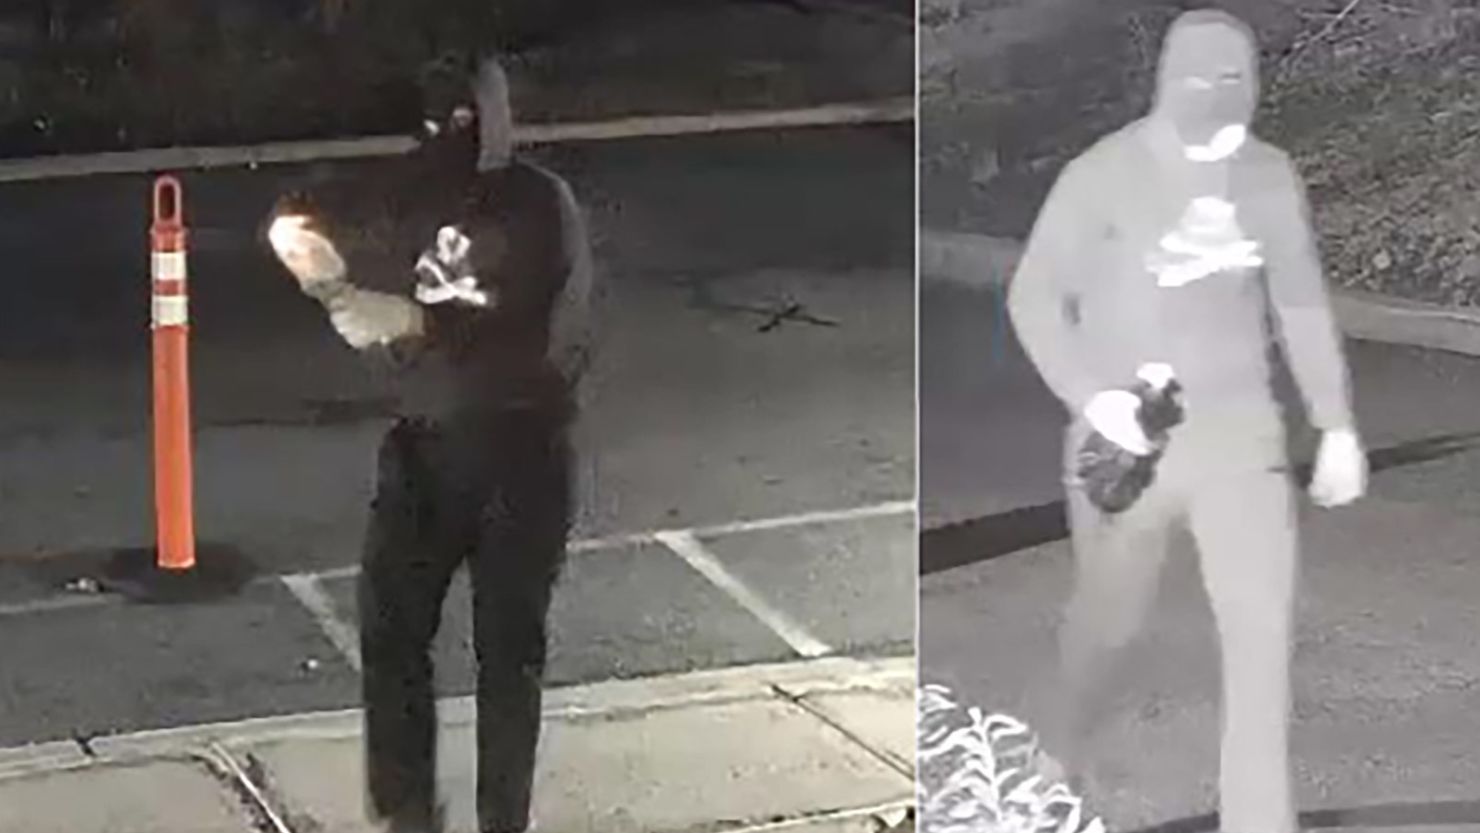 A masked suspect is seen lighting a Molotov cocktail in front of Temple Ner Tamid in a still image from surveillance footage in Bloomfield, New Jersey, on Sunday.